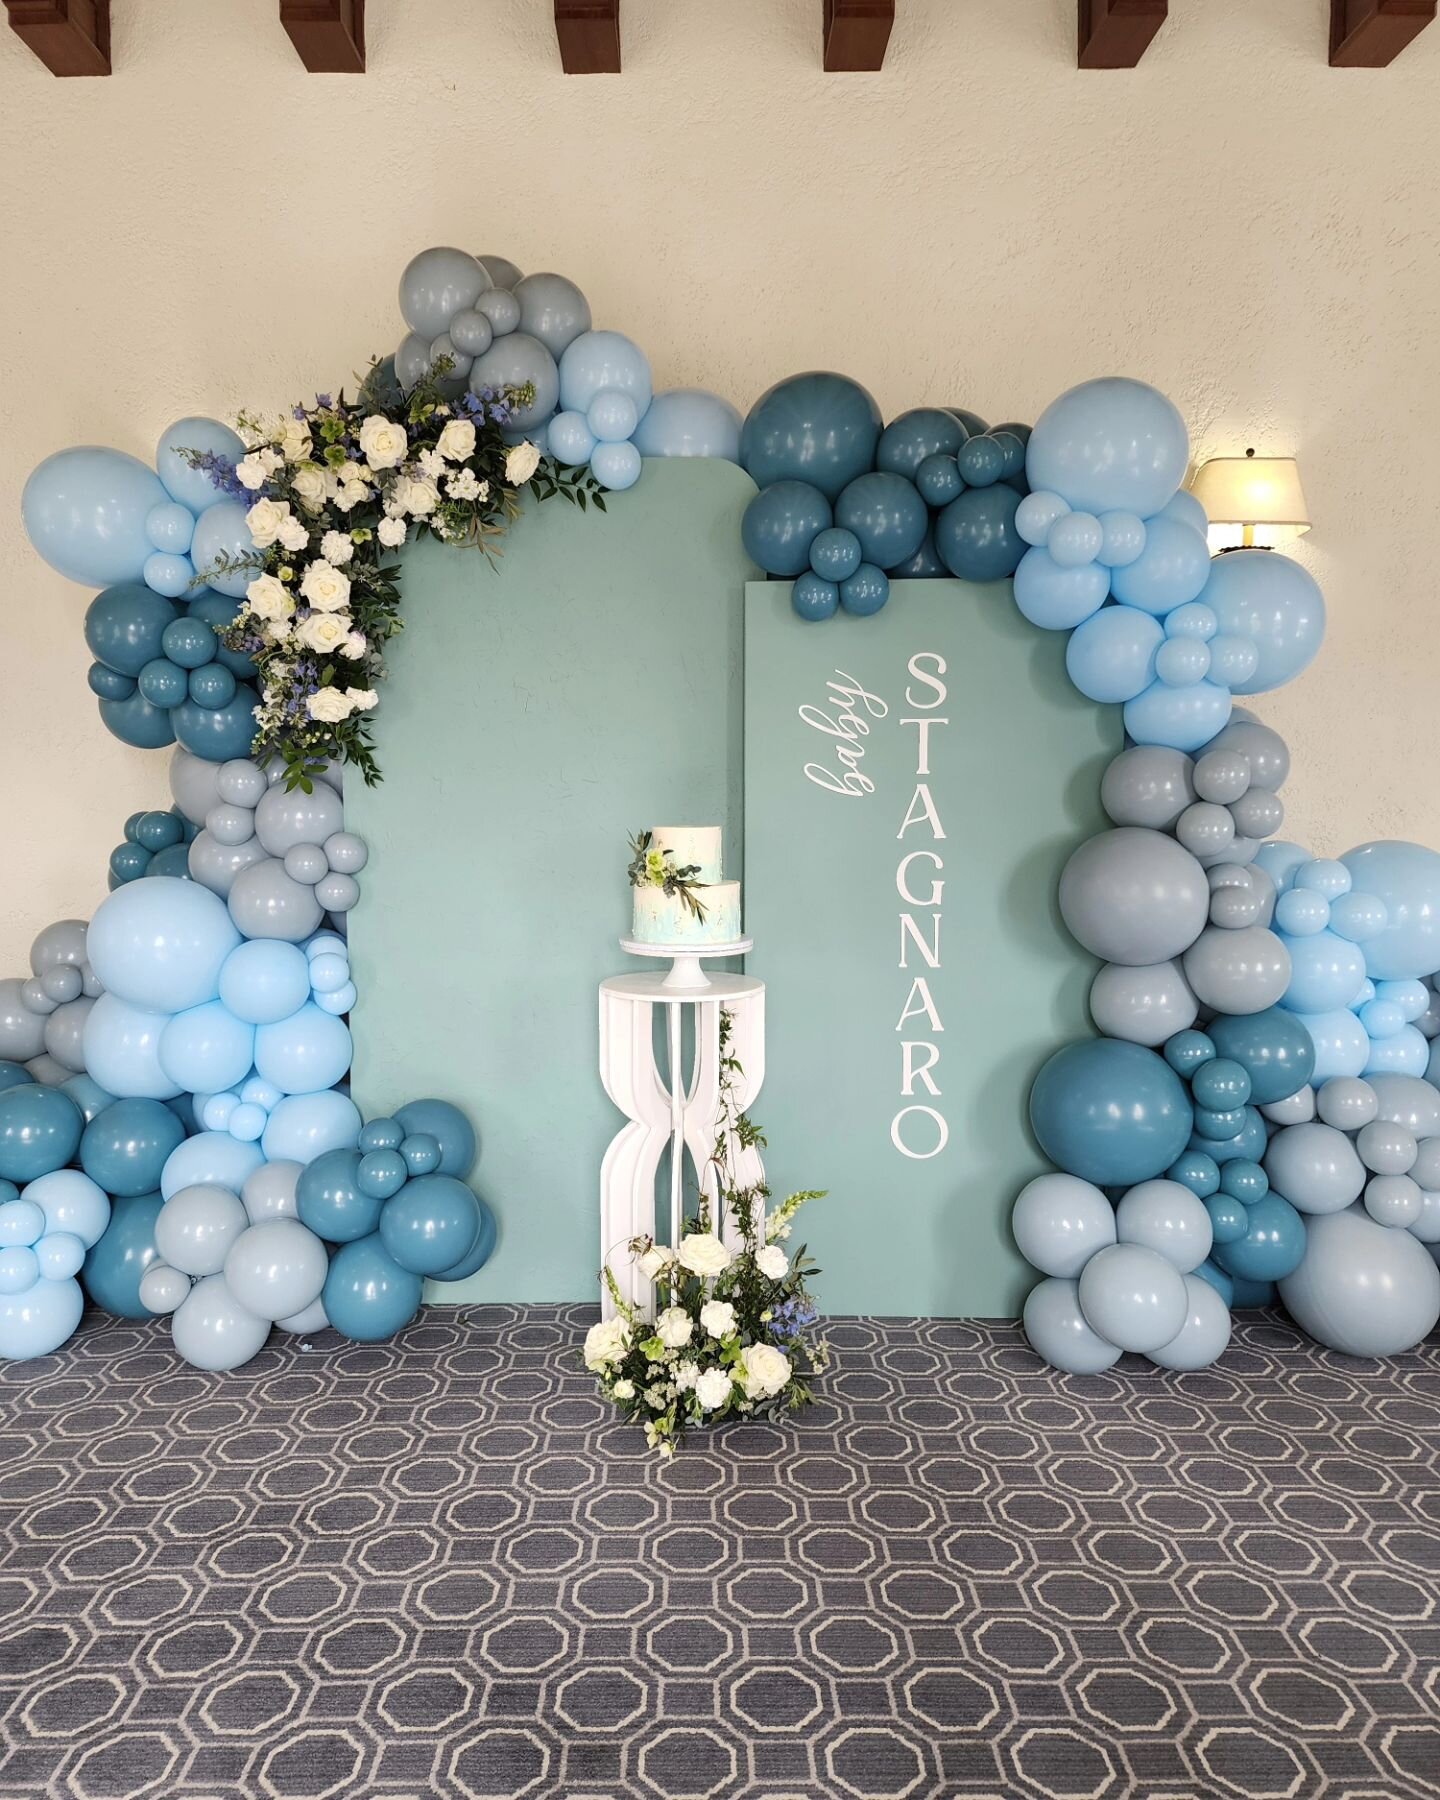 Shades of blues and greens for this perfect day, celebrating a little one on the way! 🍼

#babyshower #ohbaby #baby boy #babyboyshower